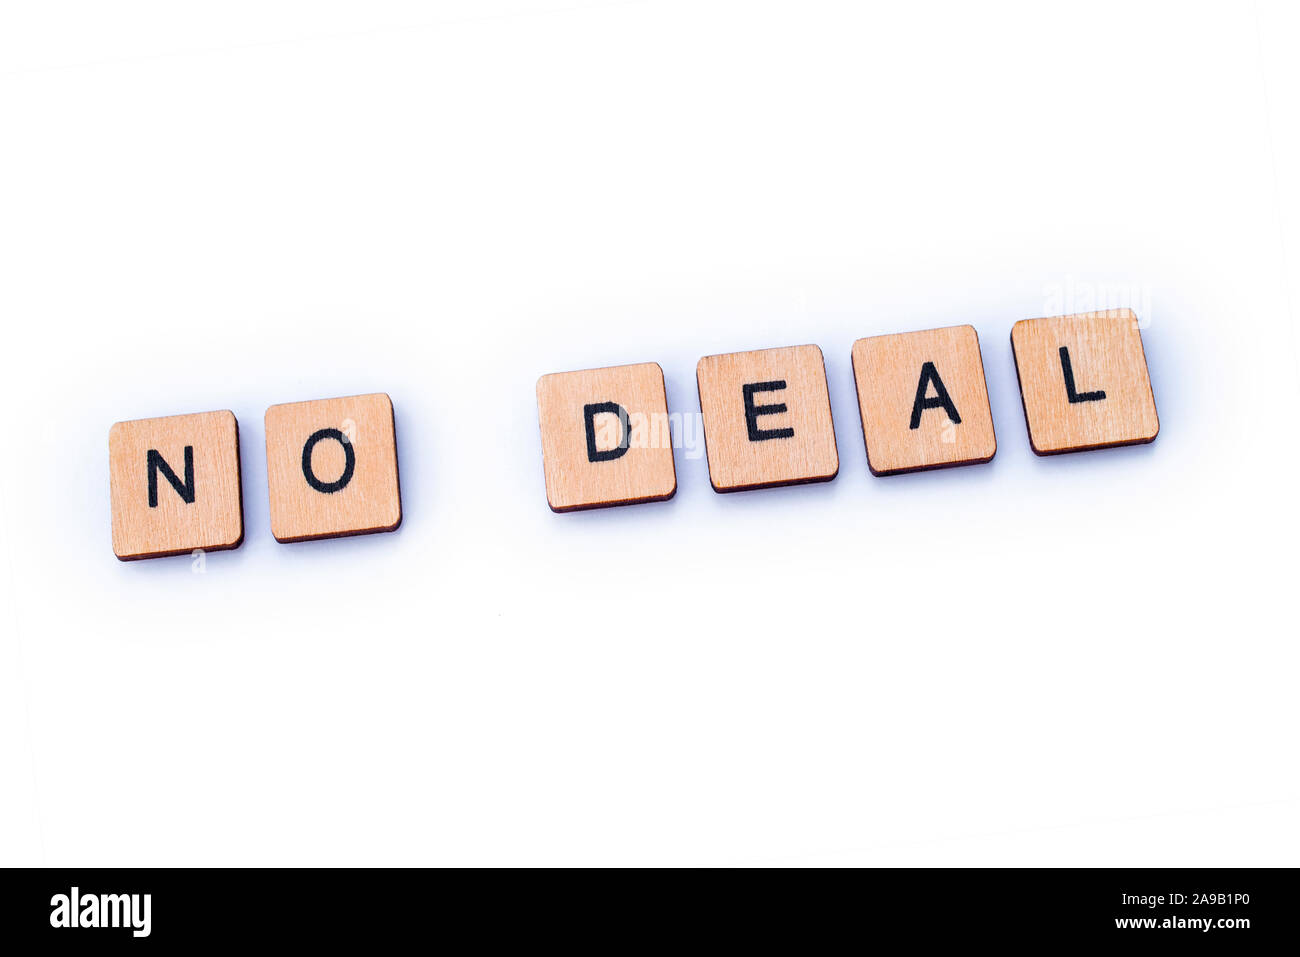 NO DEAL, spelt out with wooden letter tiles. Stock Photo